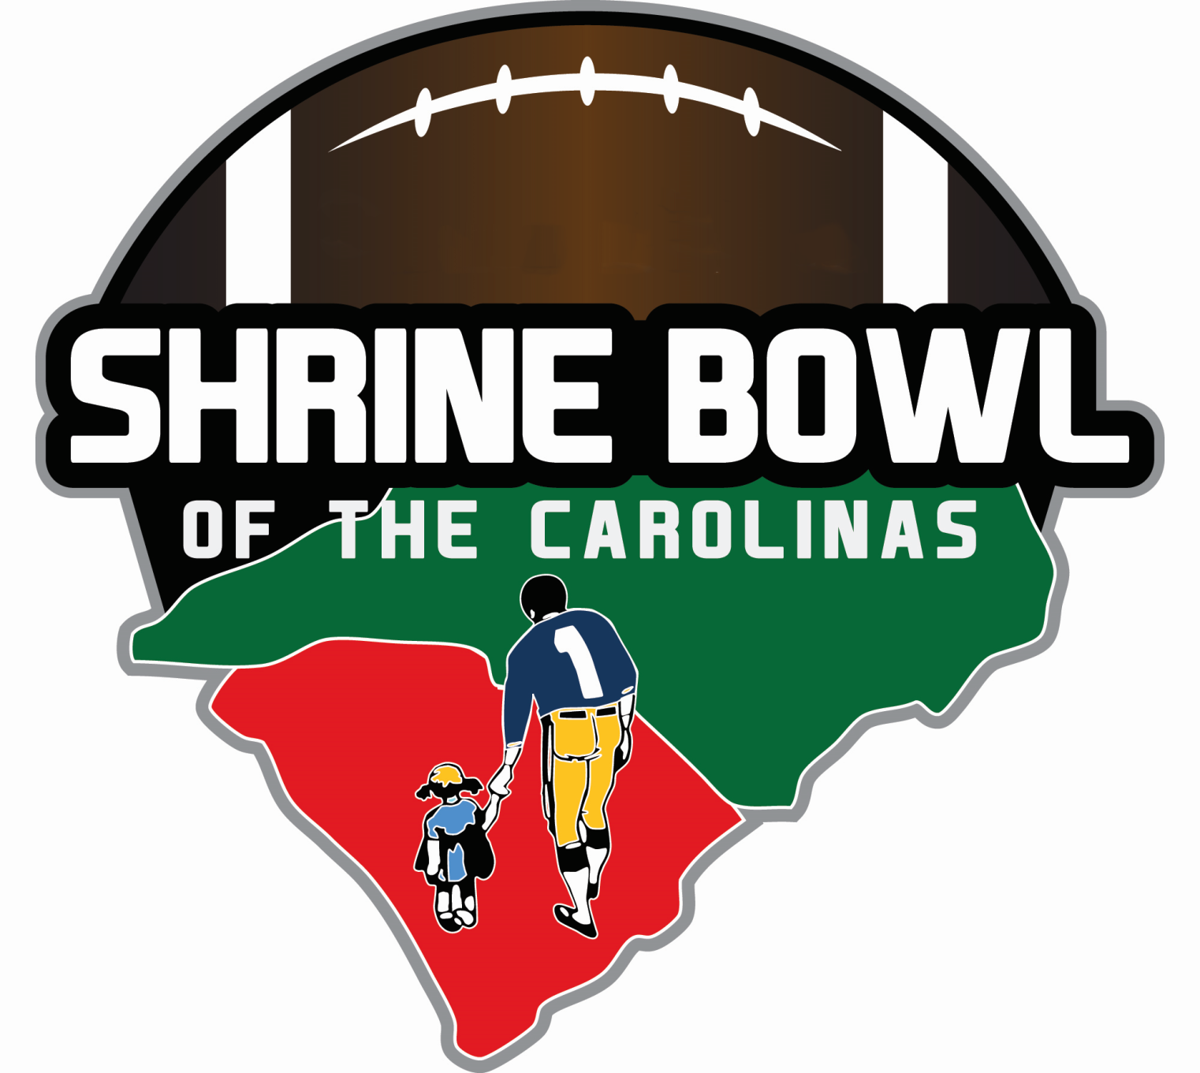 No Shrine Bowl Game in 2020; teams will be selected